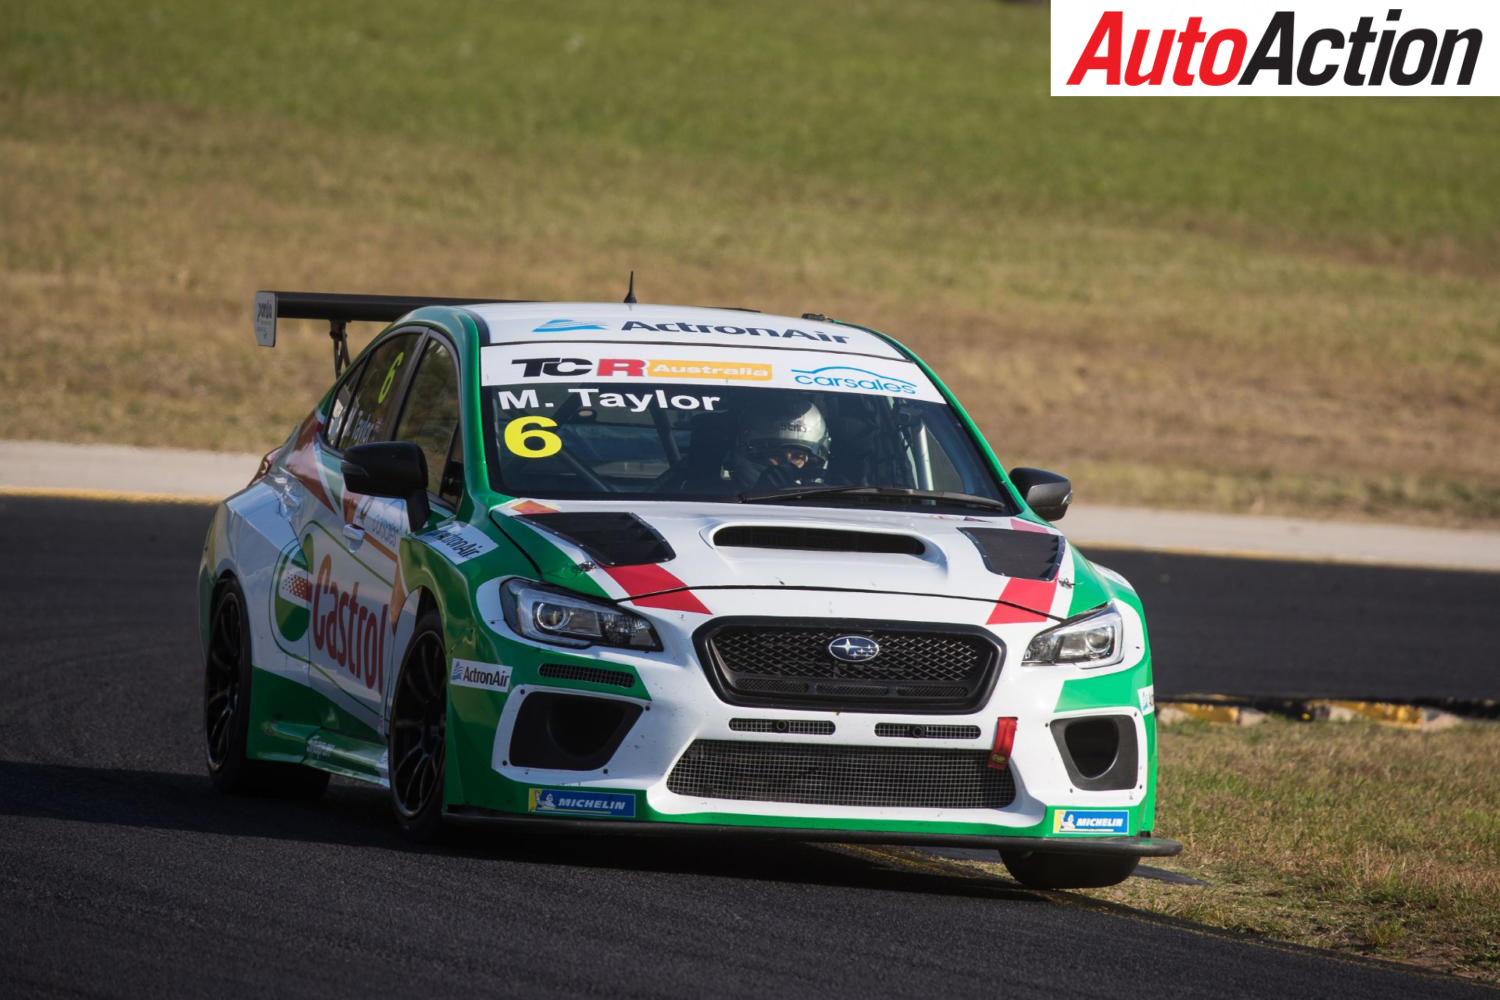 TCR Adjusts weights for Phillip Island - Photo: InSyde Media